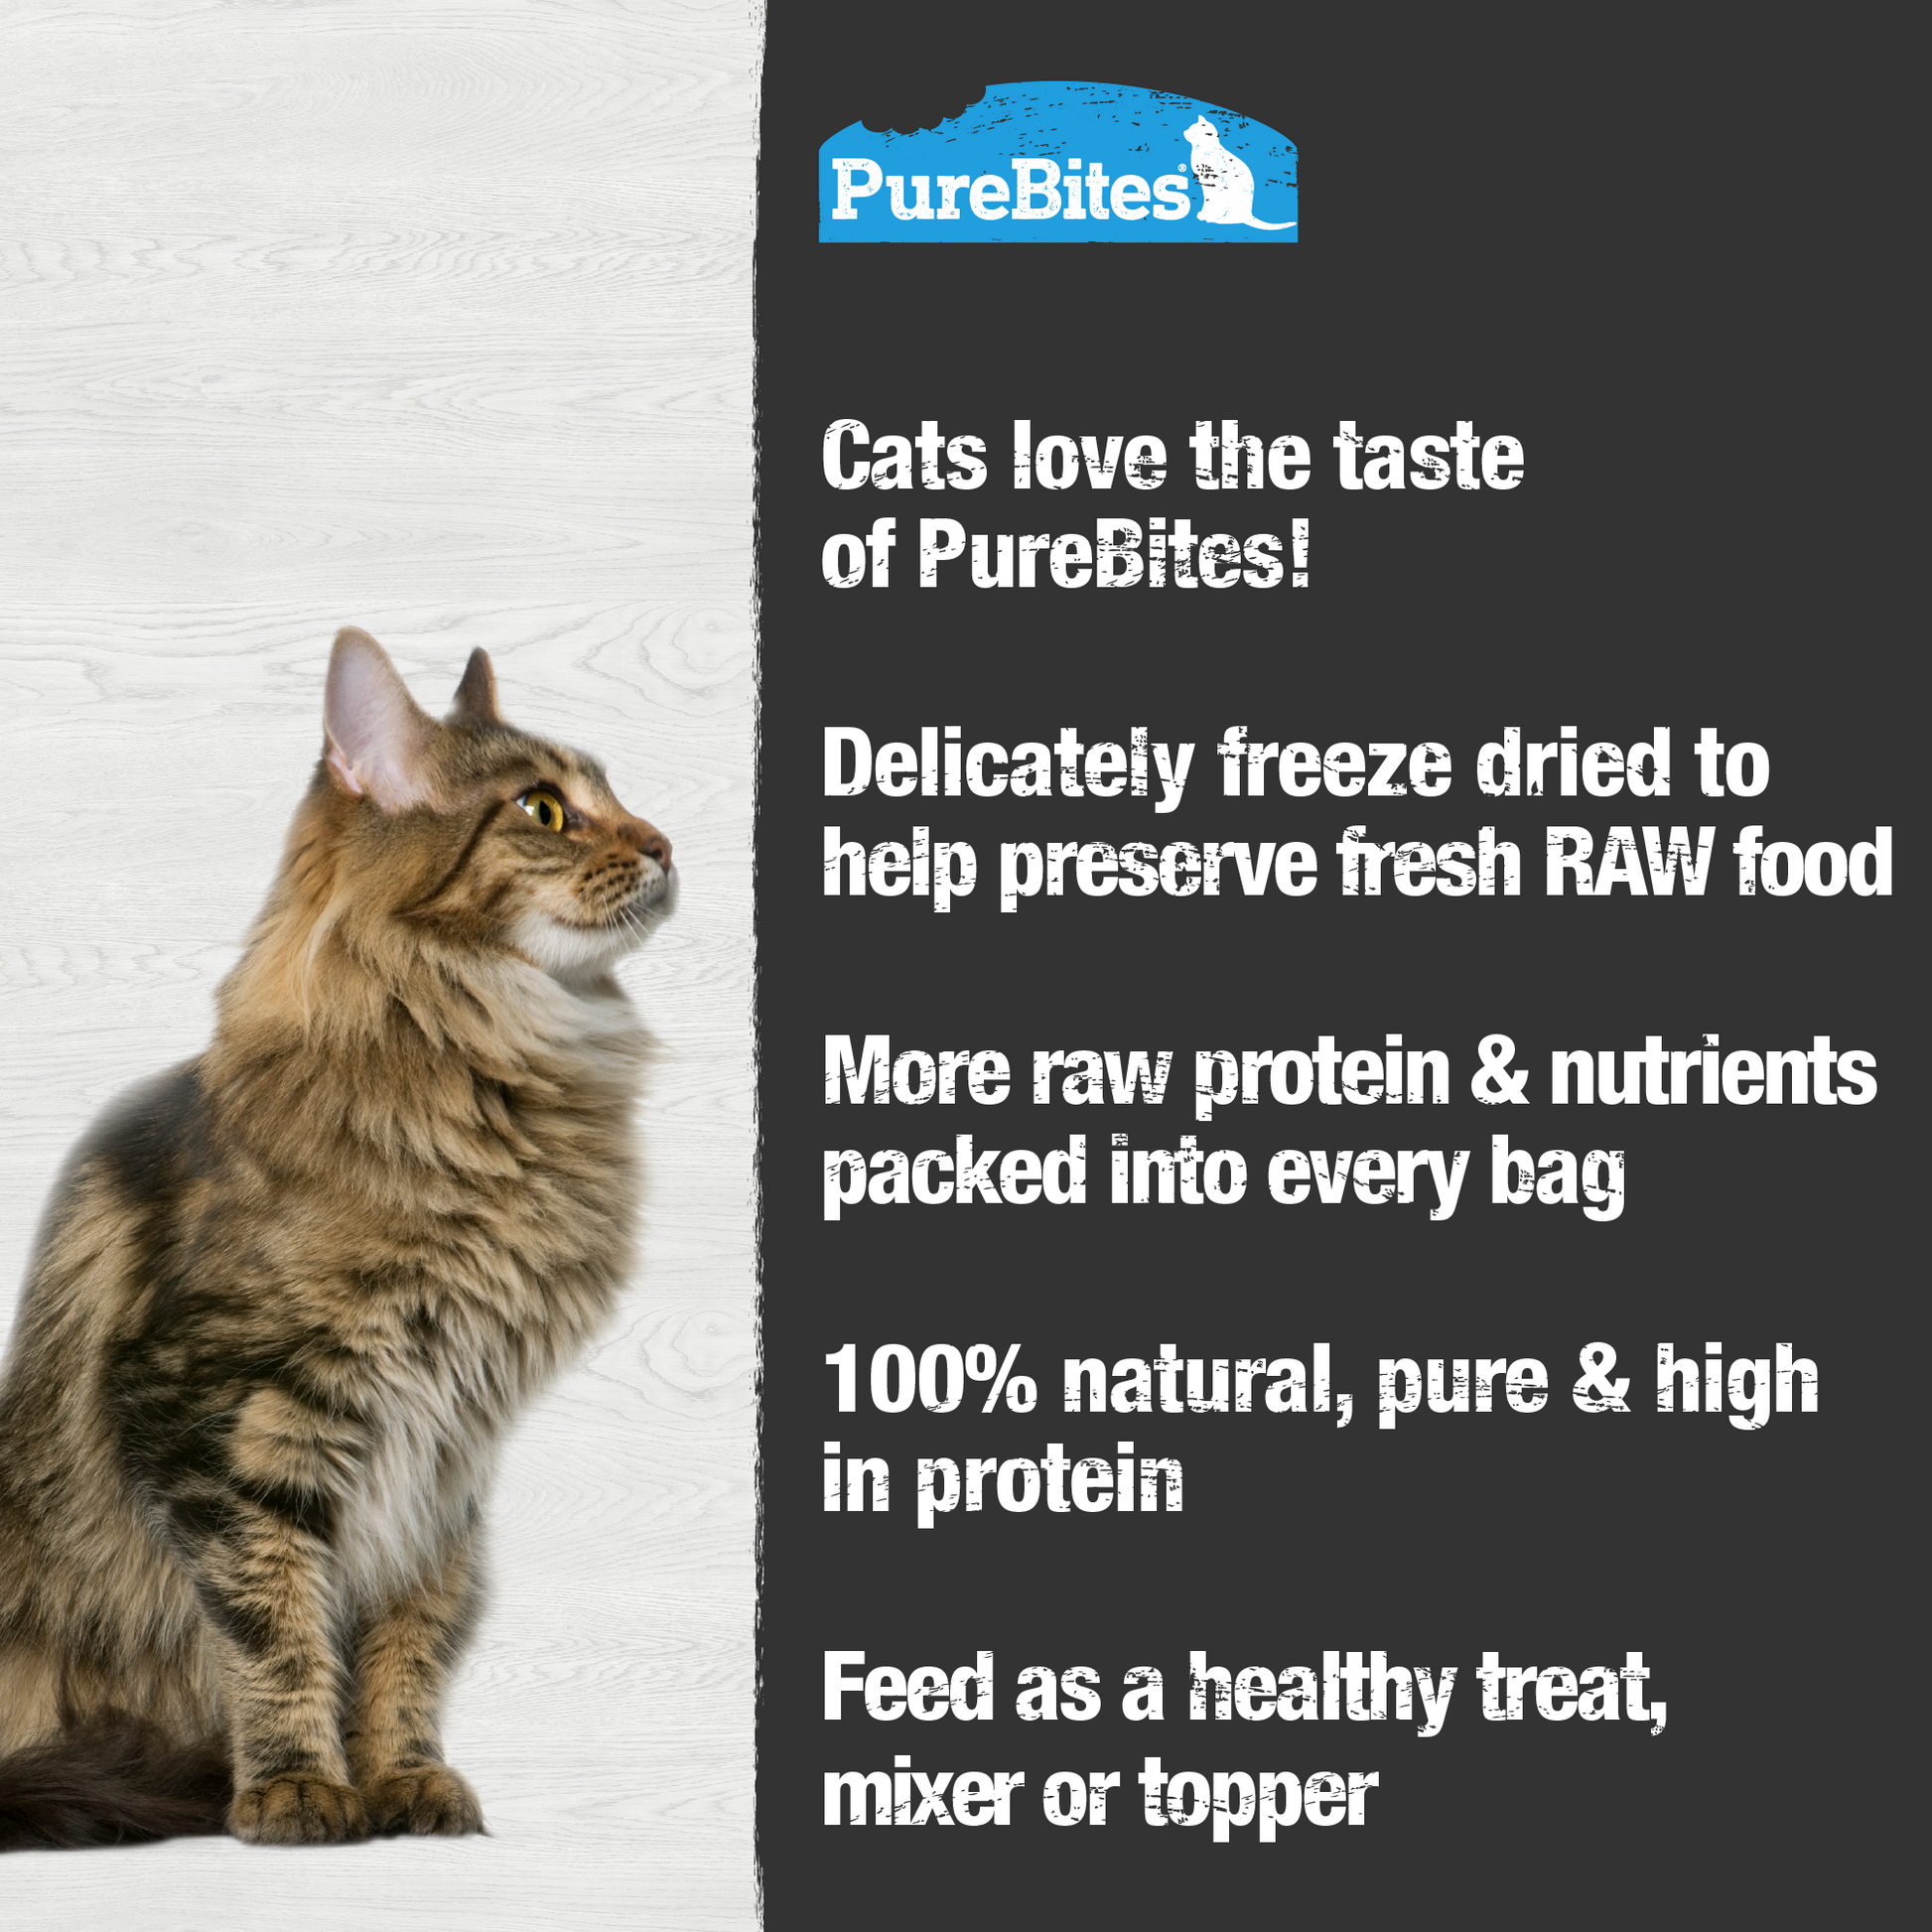 Made fresh & pure means more RAW protein and nutrients packed into every bag. Our tuna treats are freeze dried to help preserve its RAW taste, and nutrition, and mirror a cat’s ancestral diet